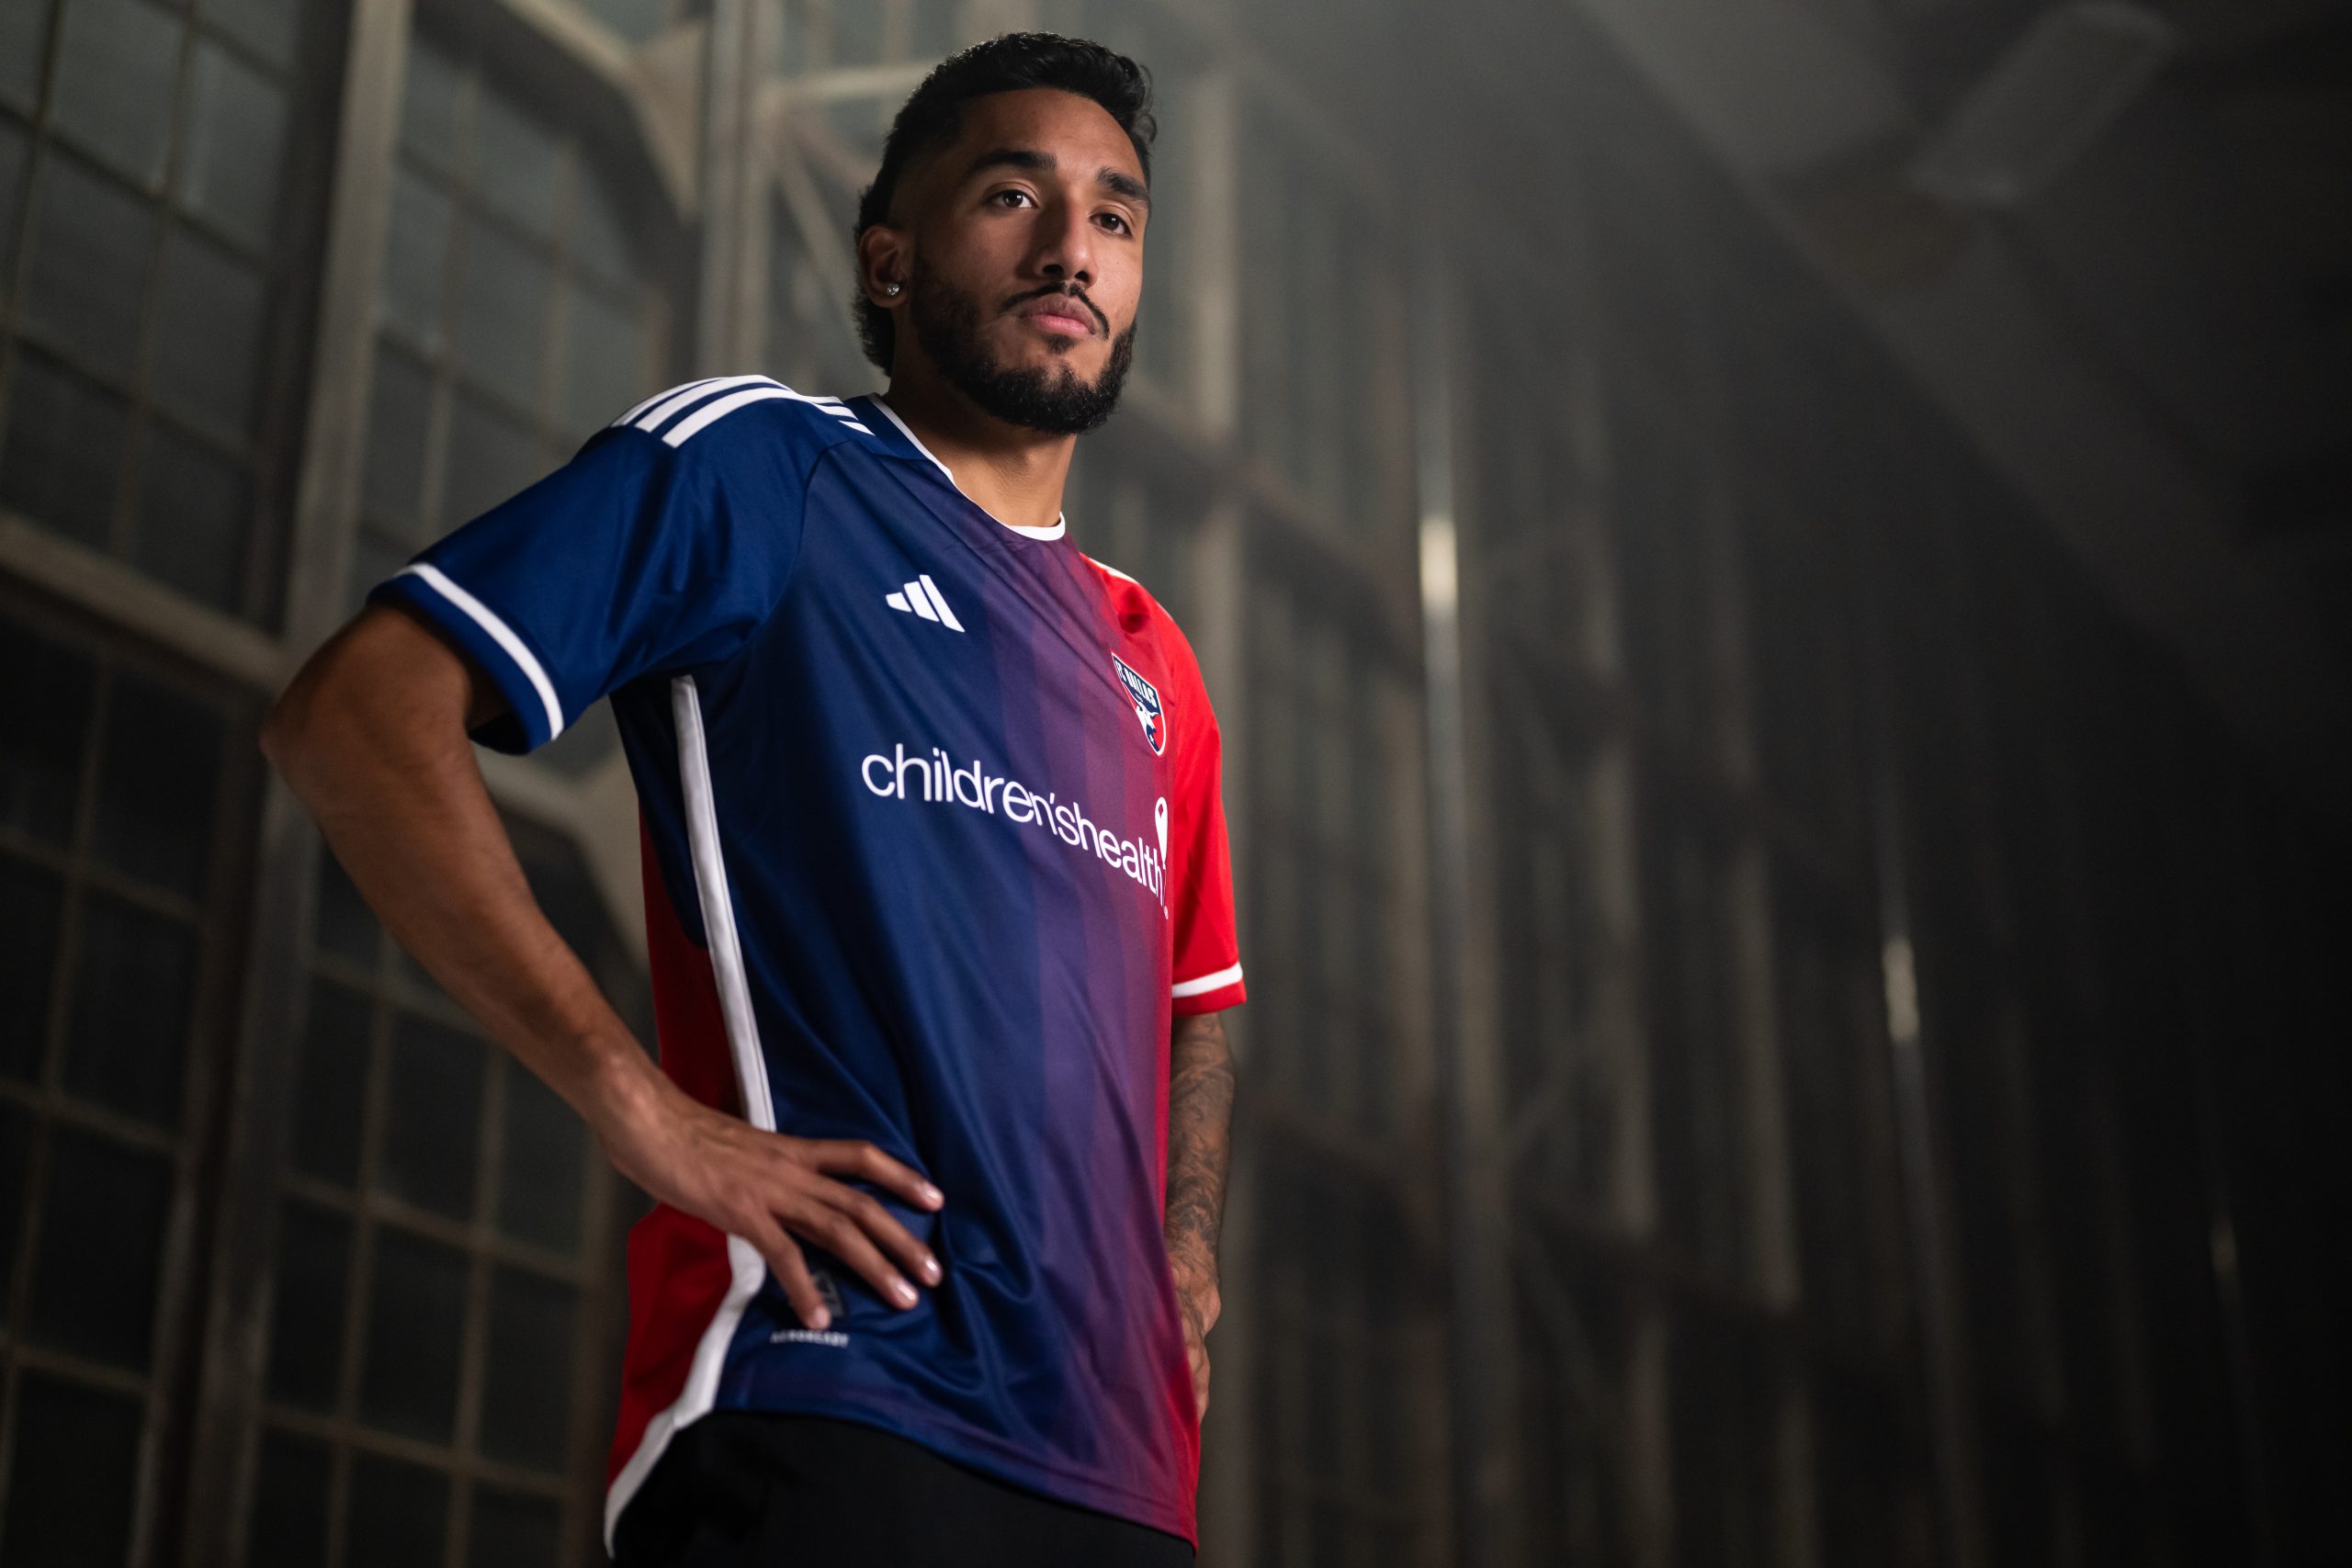 FC Dallas launched its Afterburner kit worn by Jesus Ferreira. (Courtesy FC Dallas)